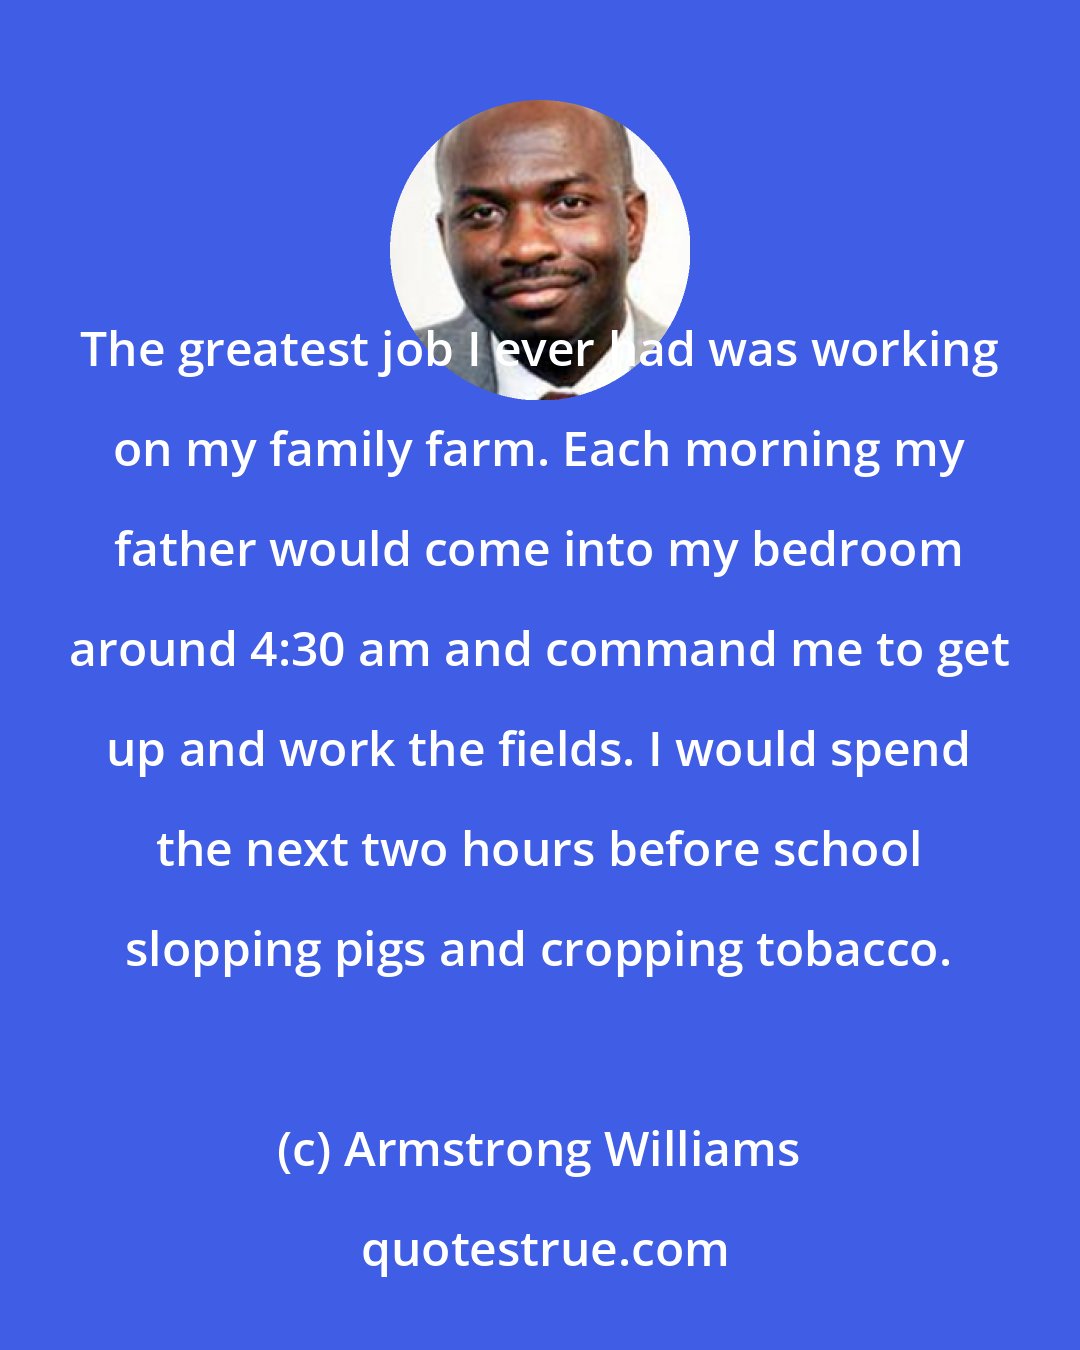 Armstrong Williams: The greatest job I ever had was working on my family farm. Each morning my father would come into my bedroom around 4:30 am and command me to get up and work the fields. I would spend the next two hours before school slopping pigs and cropping tobacco.